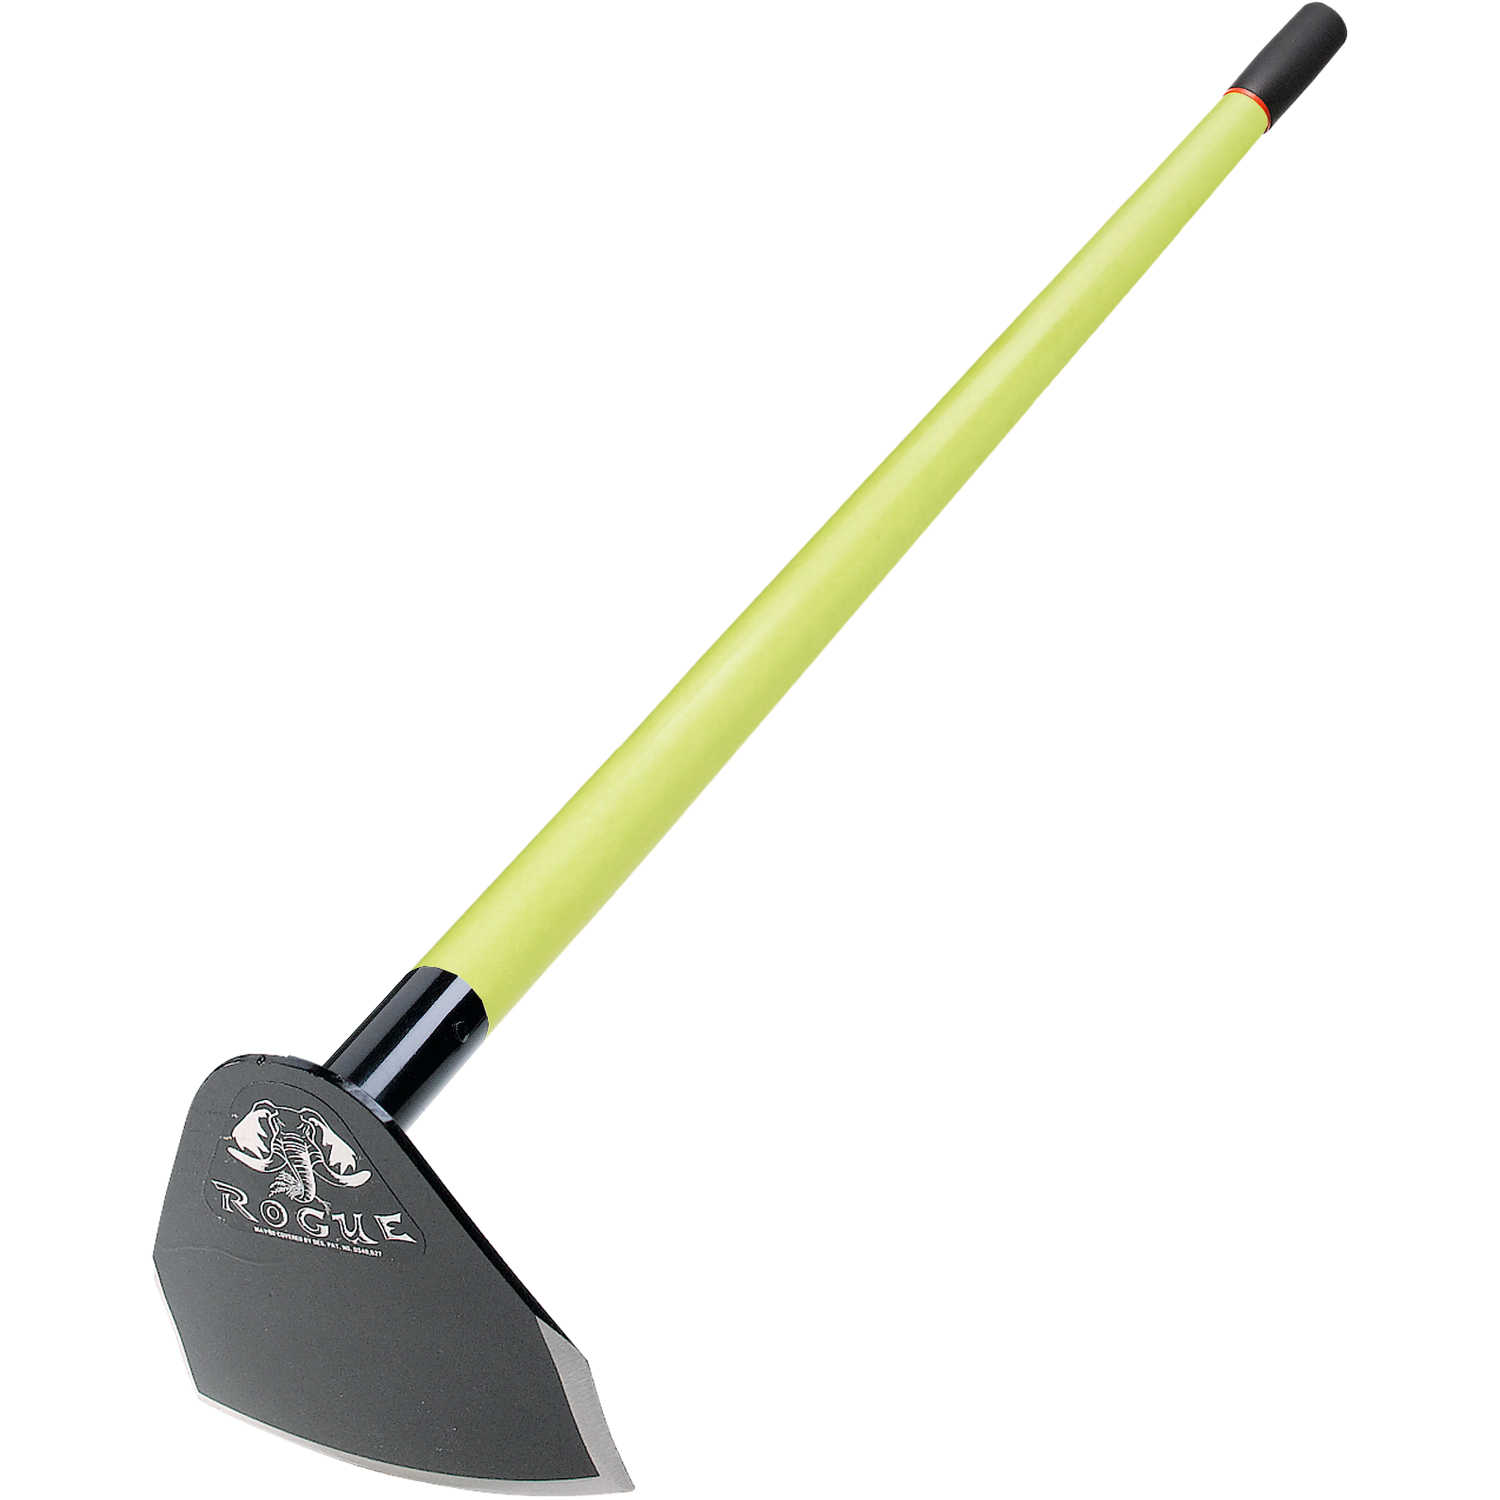 Professional Grade Smallholding Allotment Garden Hand Hoe 4" by Rogue Hoes USA 